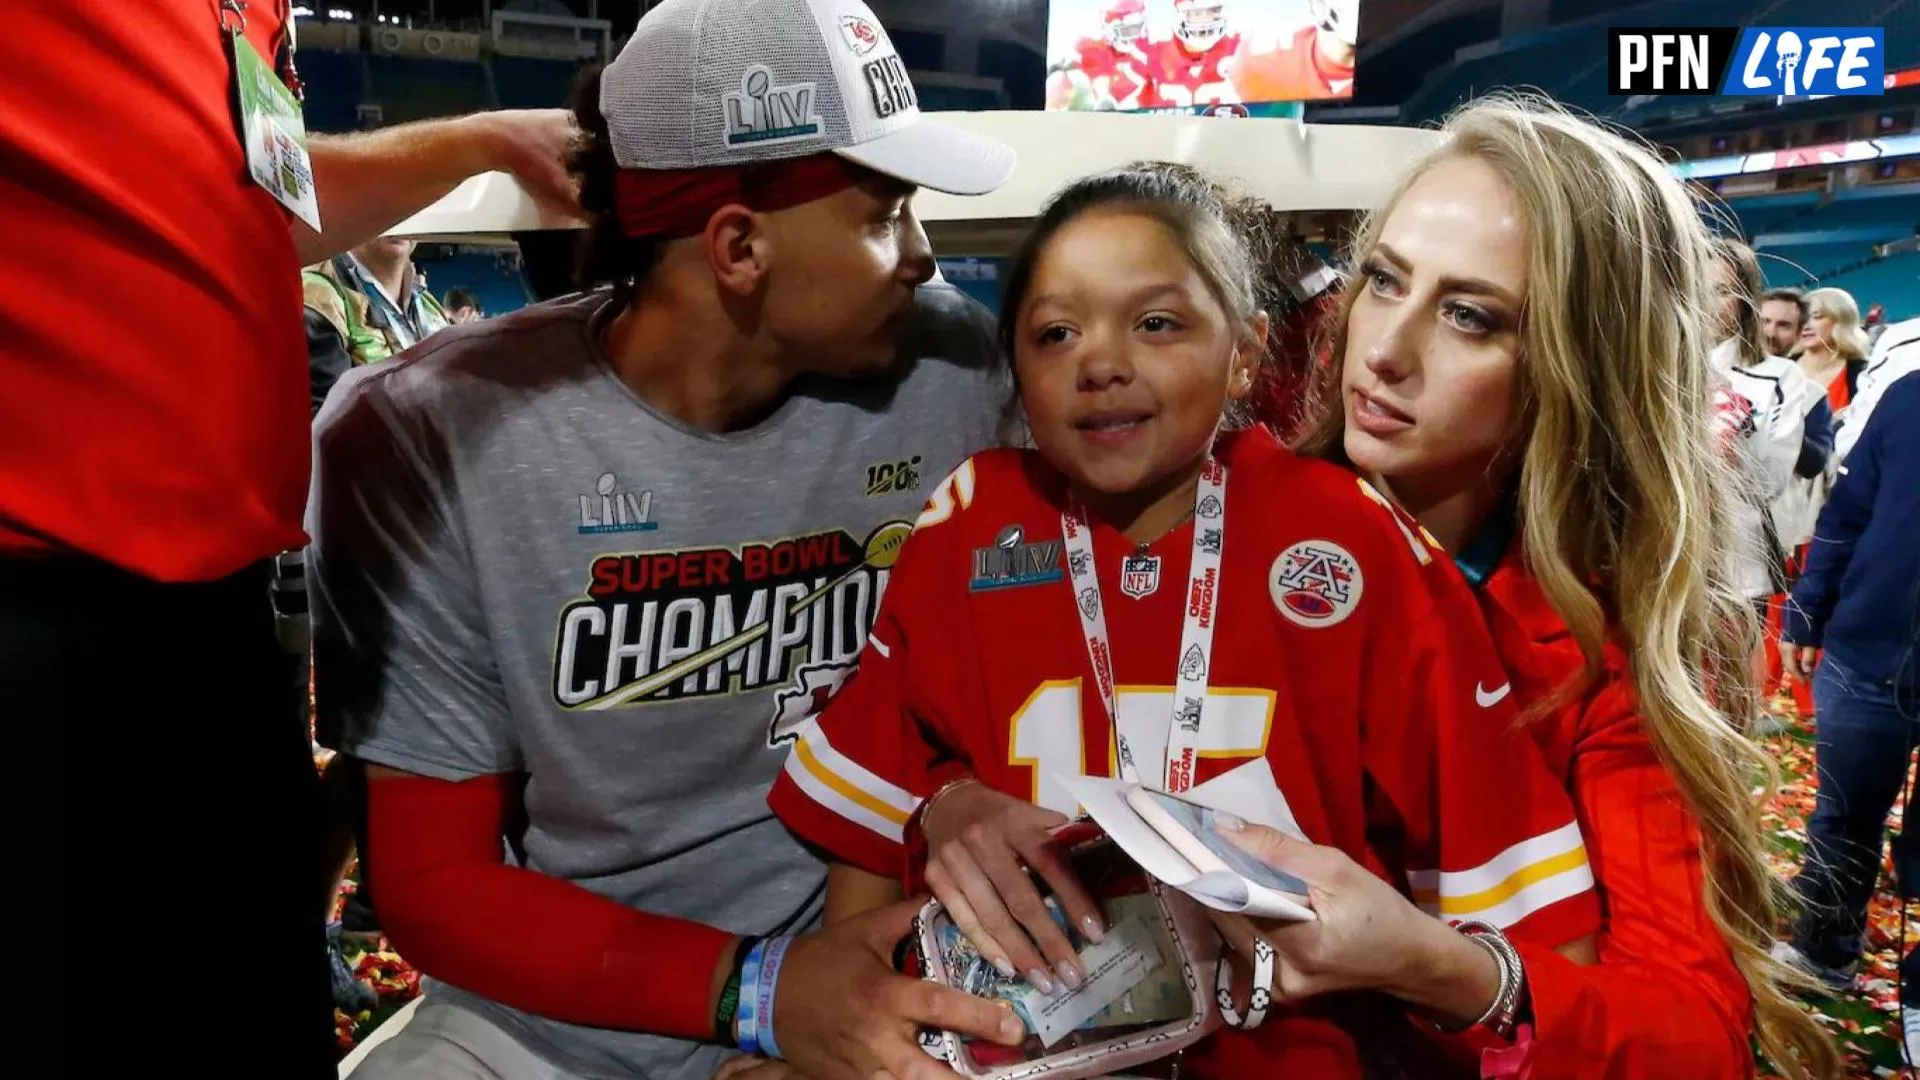 Mia Randall (Patrick Mahomes’s sister) Biography Age, Family, Father, Net worth, Career And Facts